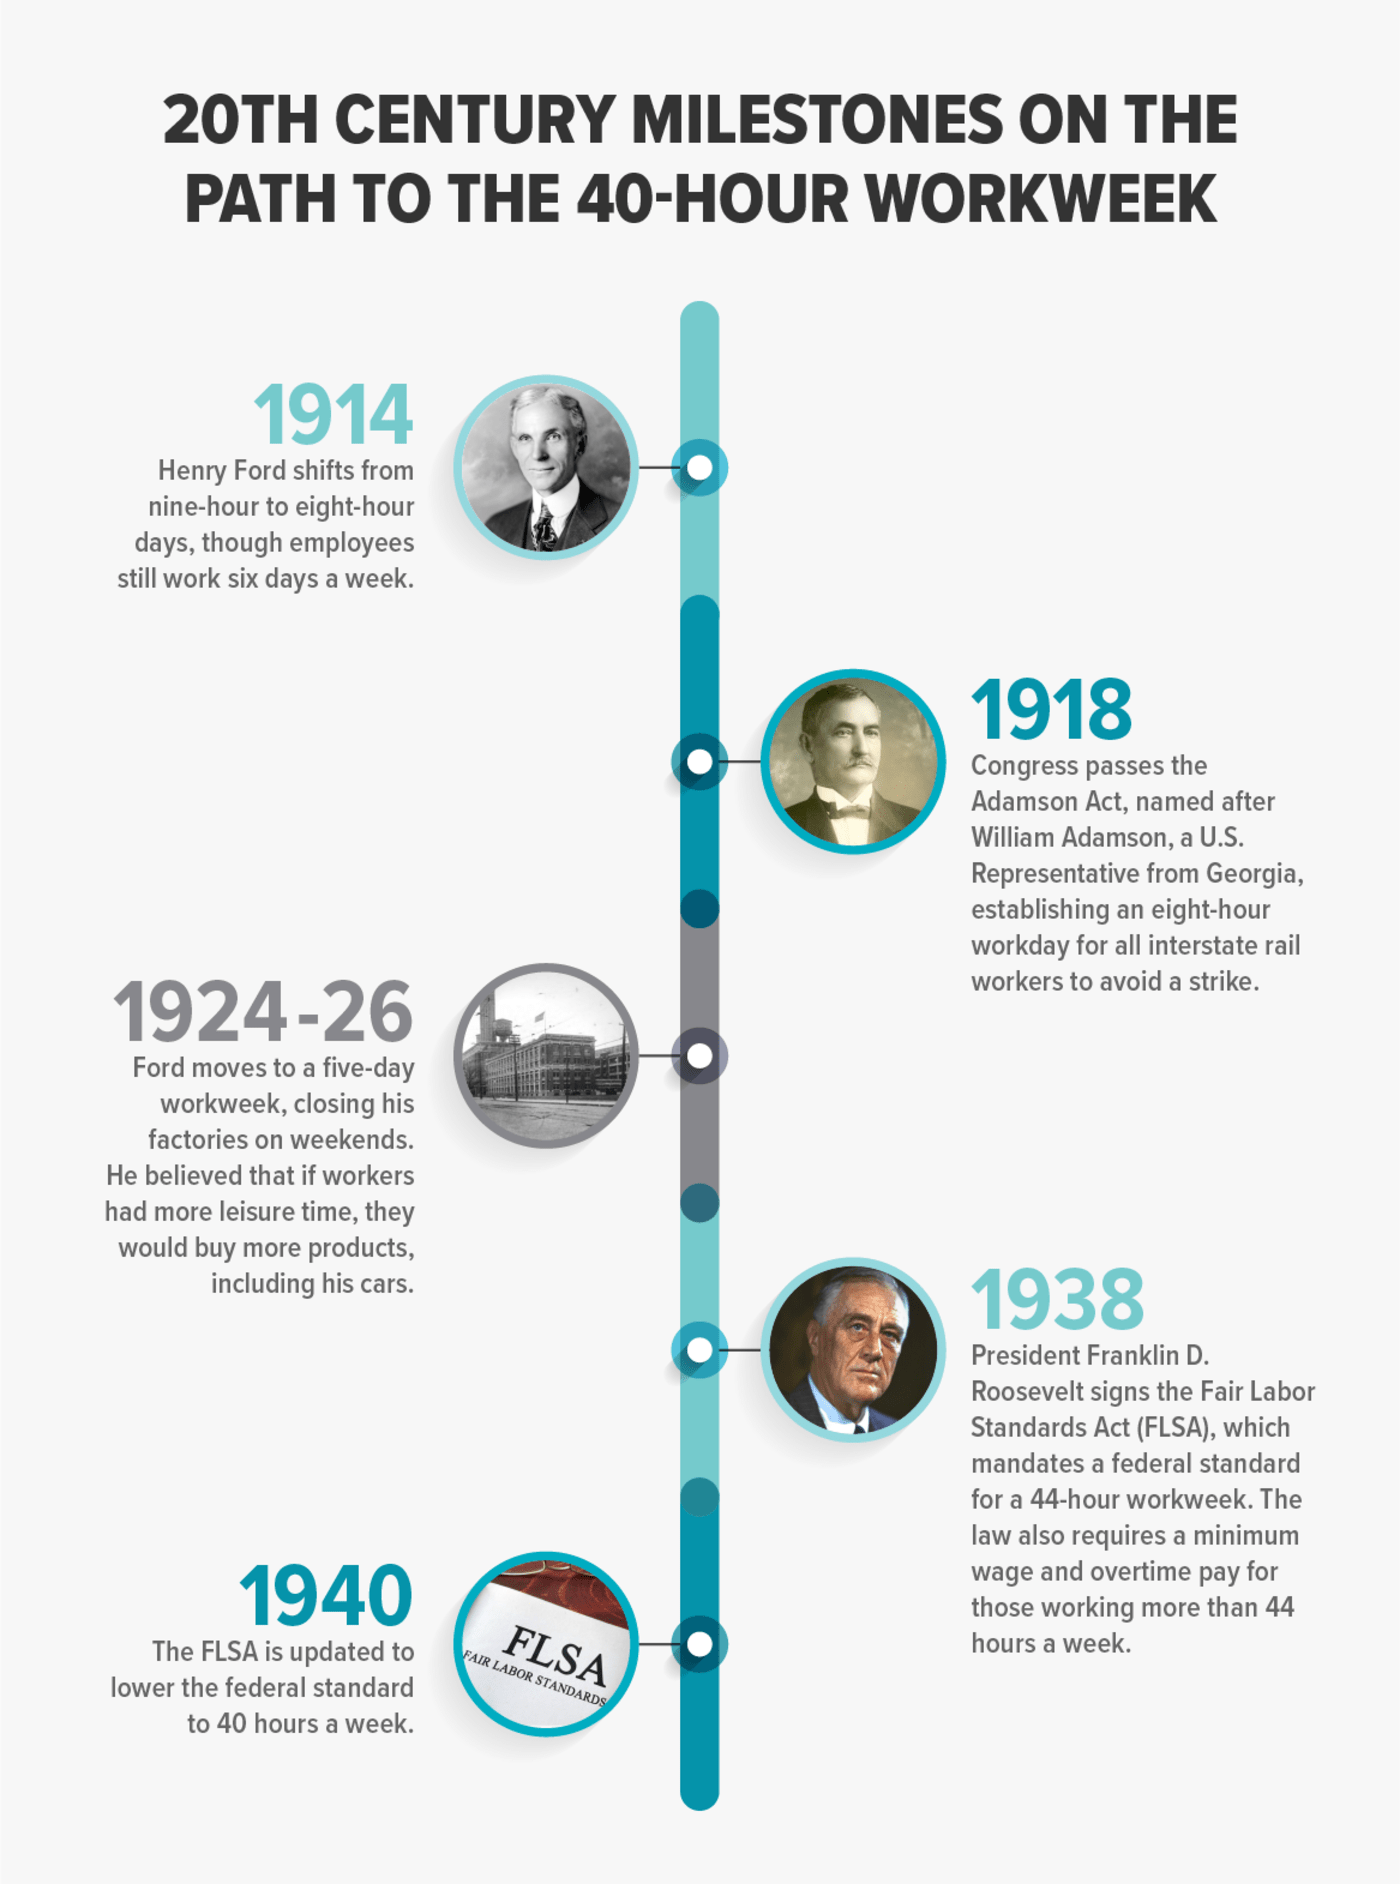 Timeline graphic '20th Century Milestones on the Path to the 40-Hour Workweek' detailing historical shifts, like Henry Ford's adoption of the five-day workweek and the enactment of the Fair Labor Standards Act in 1938 by Franklin D. Roosevelt.